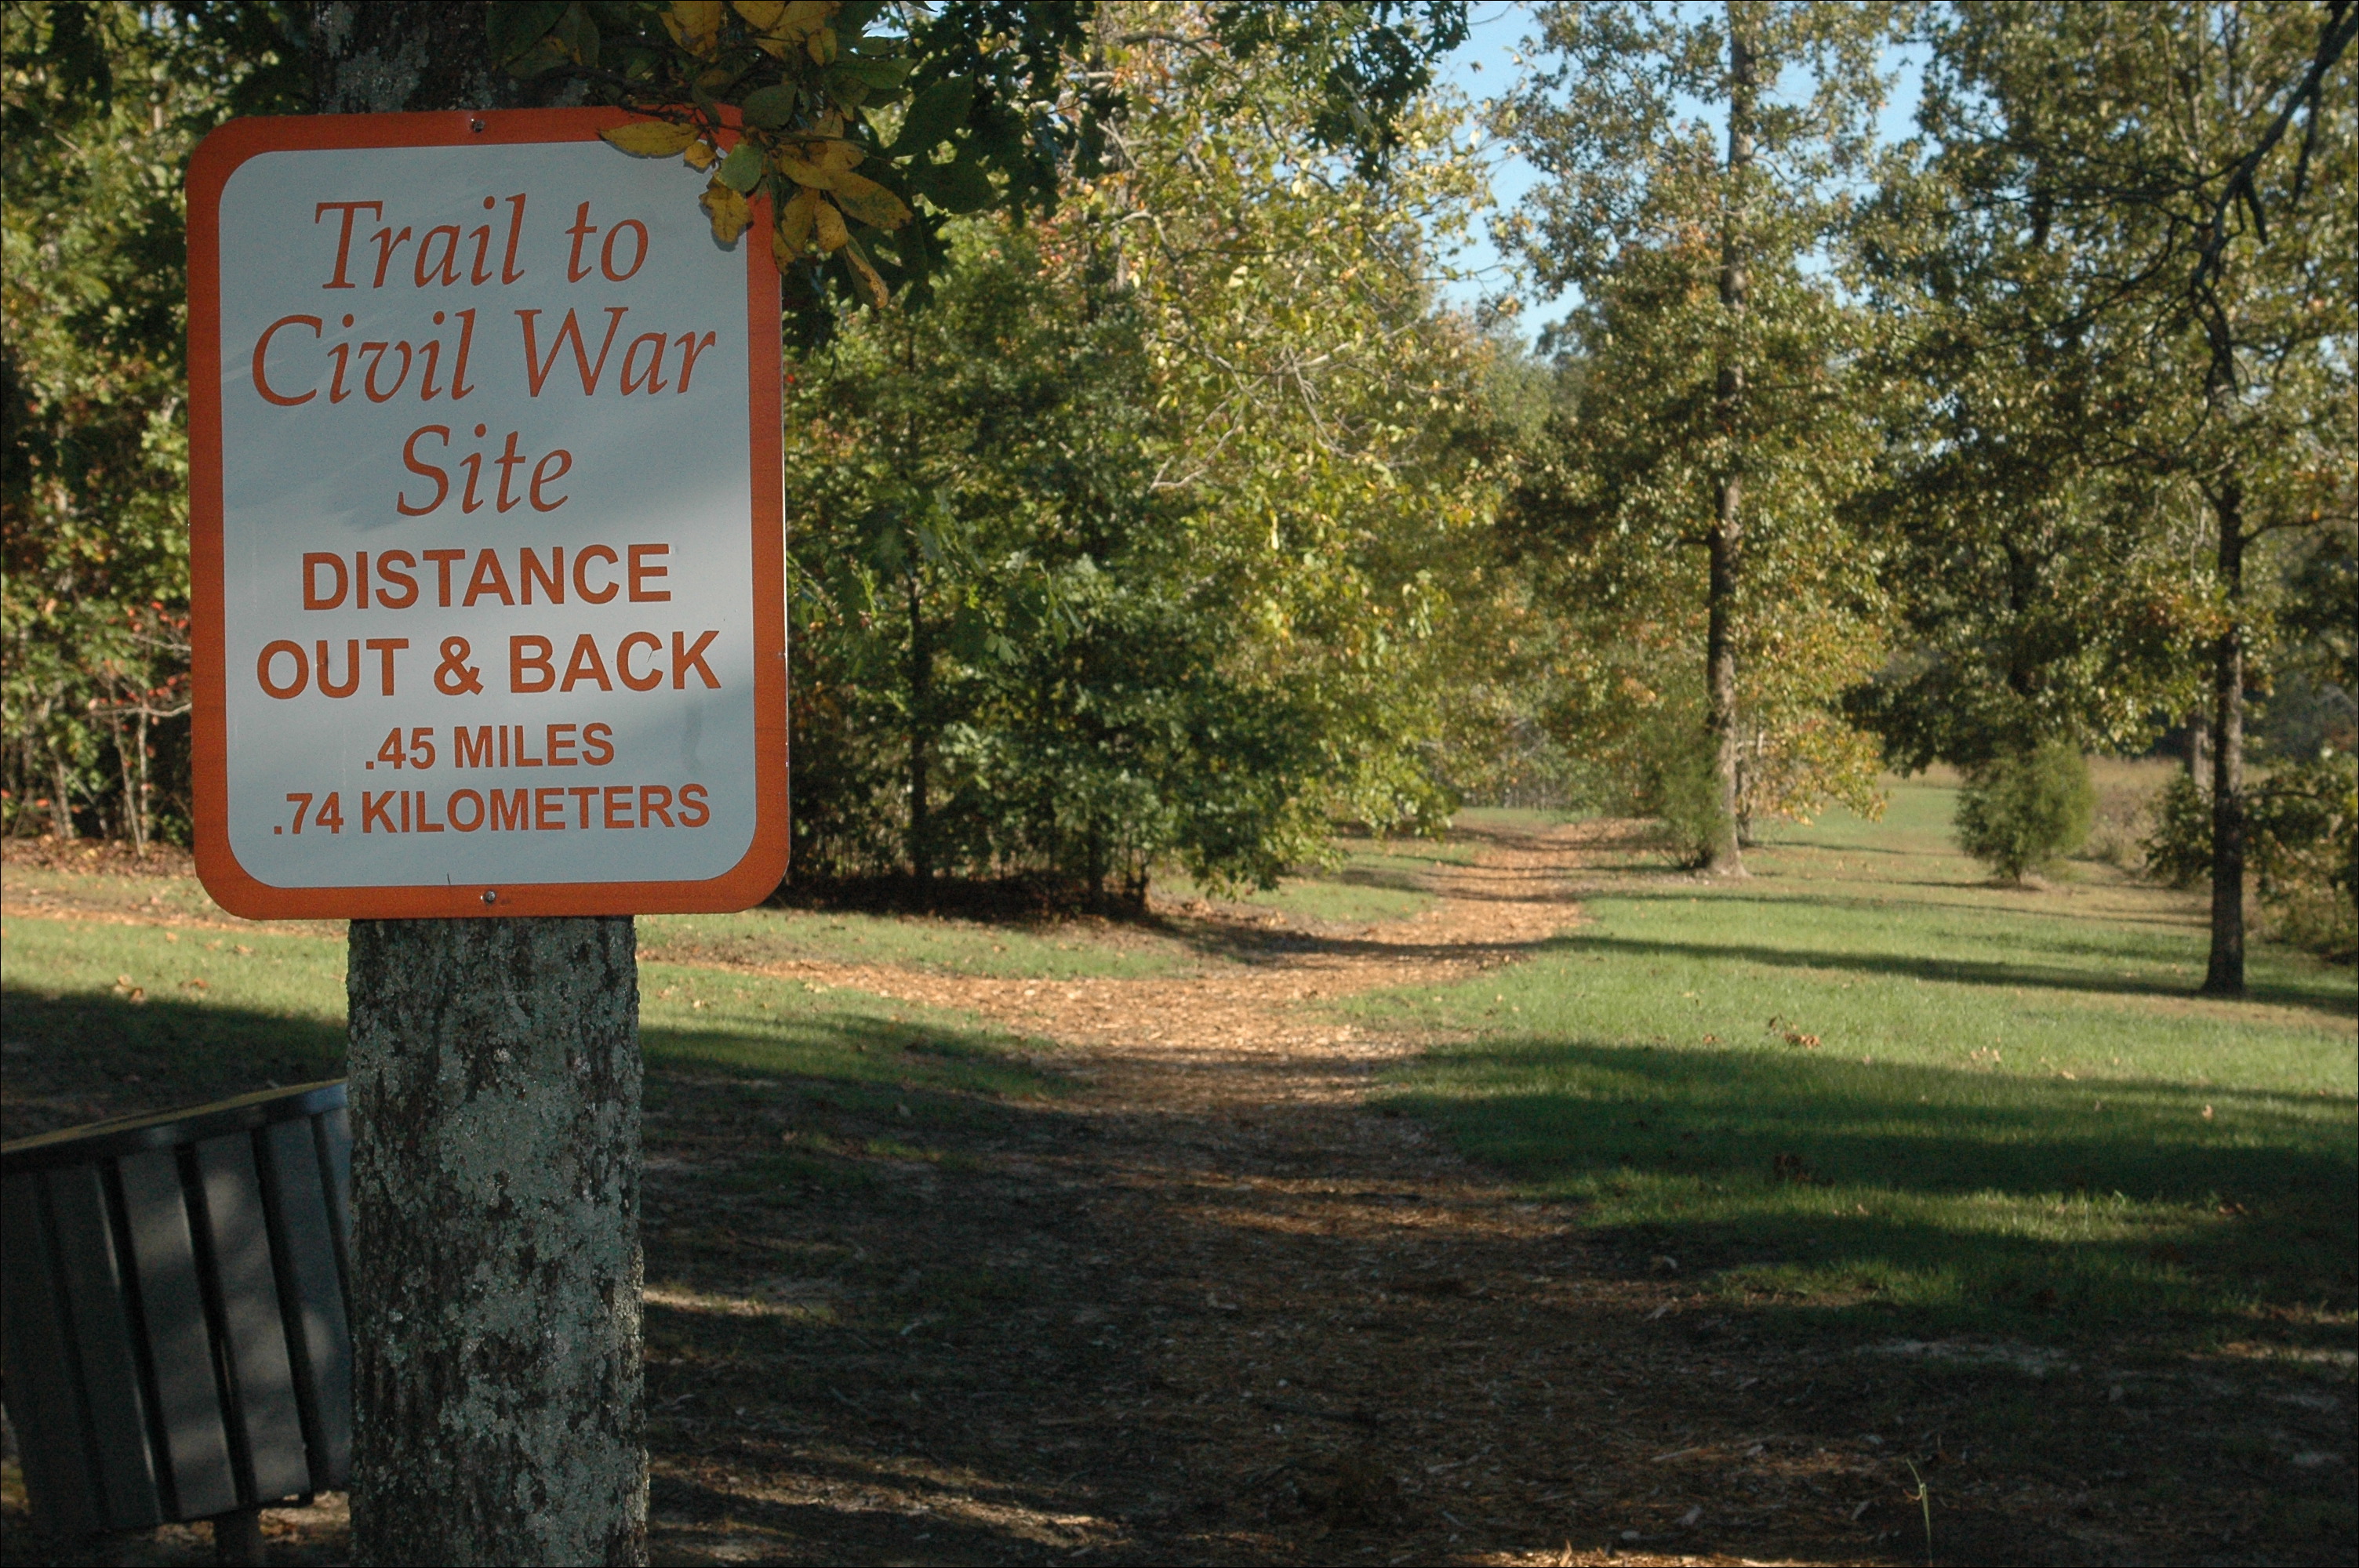 Footpaths to a Civil War site. Photo courtesy: The Daily Corinthian